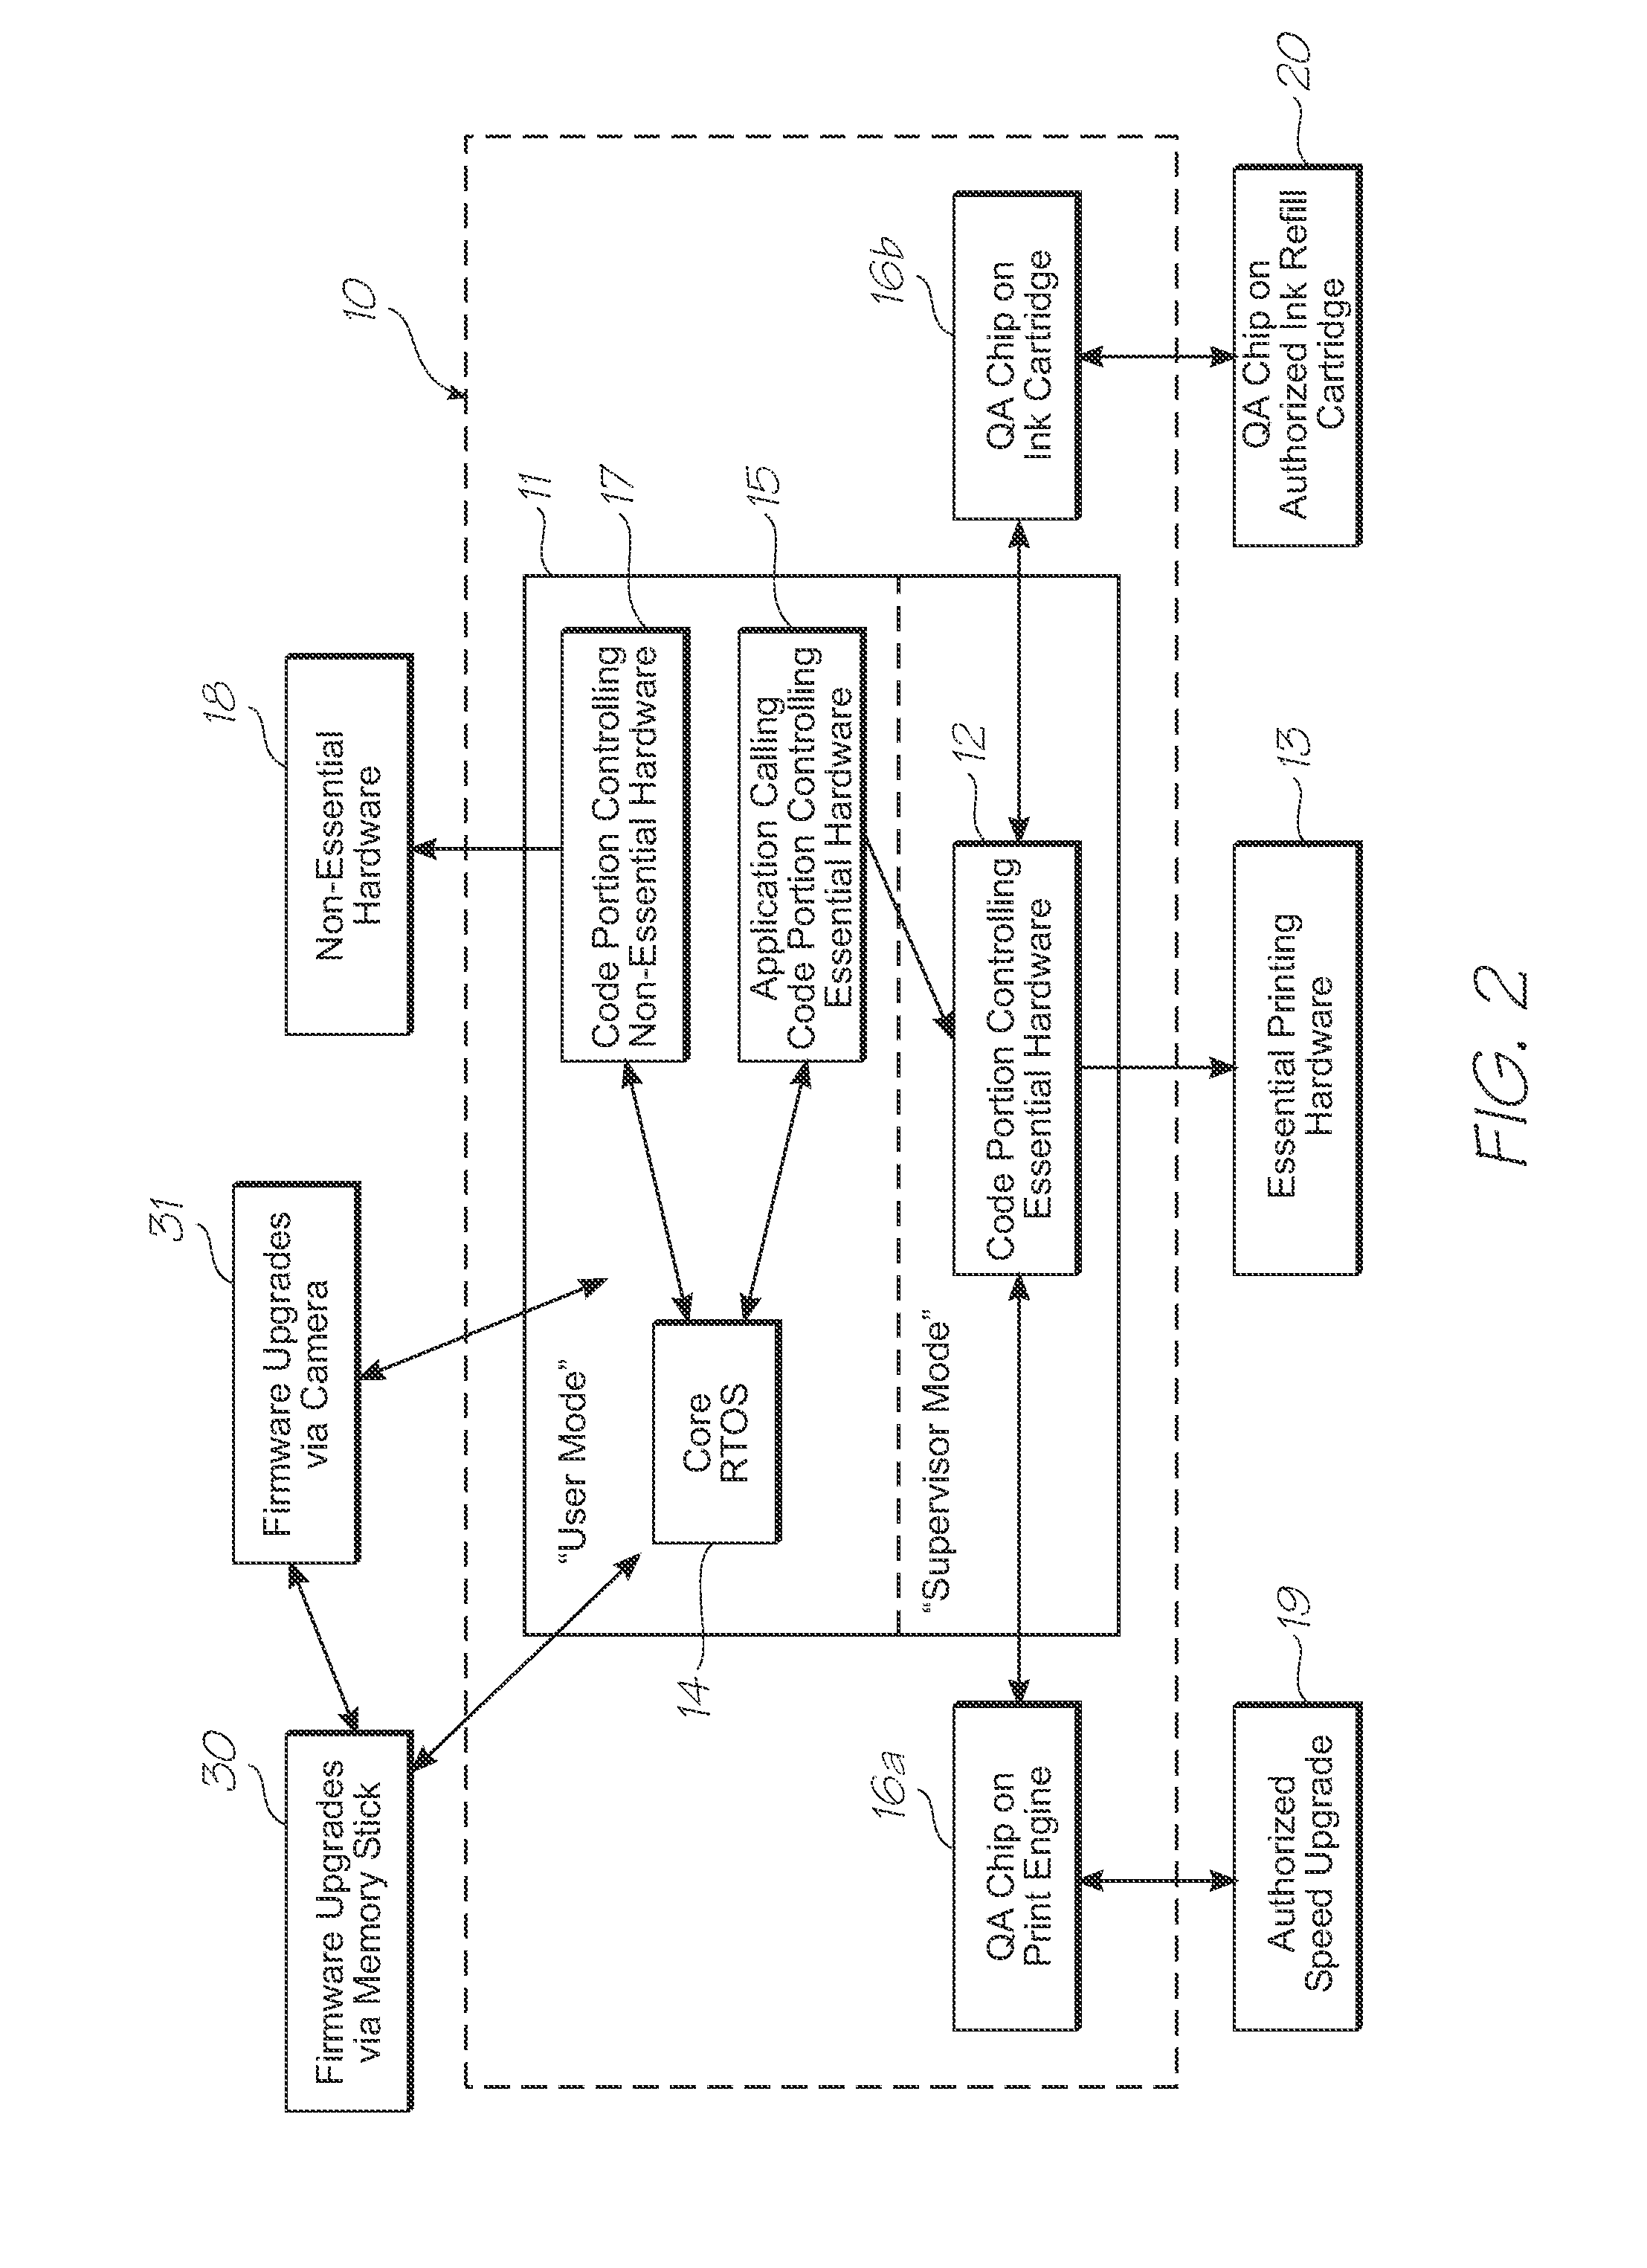 Electronic device having essential hardware authentication